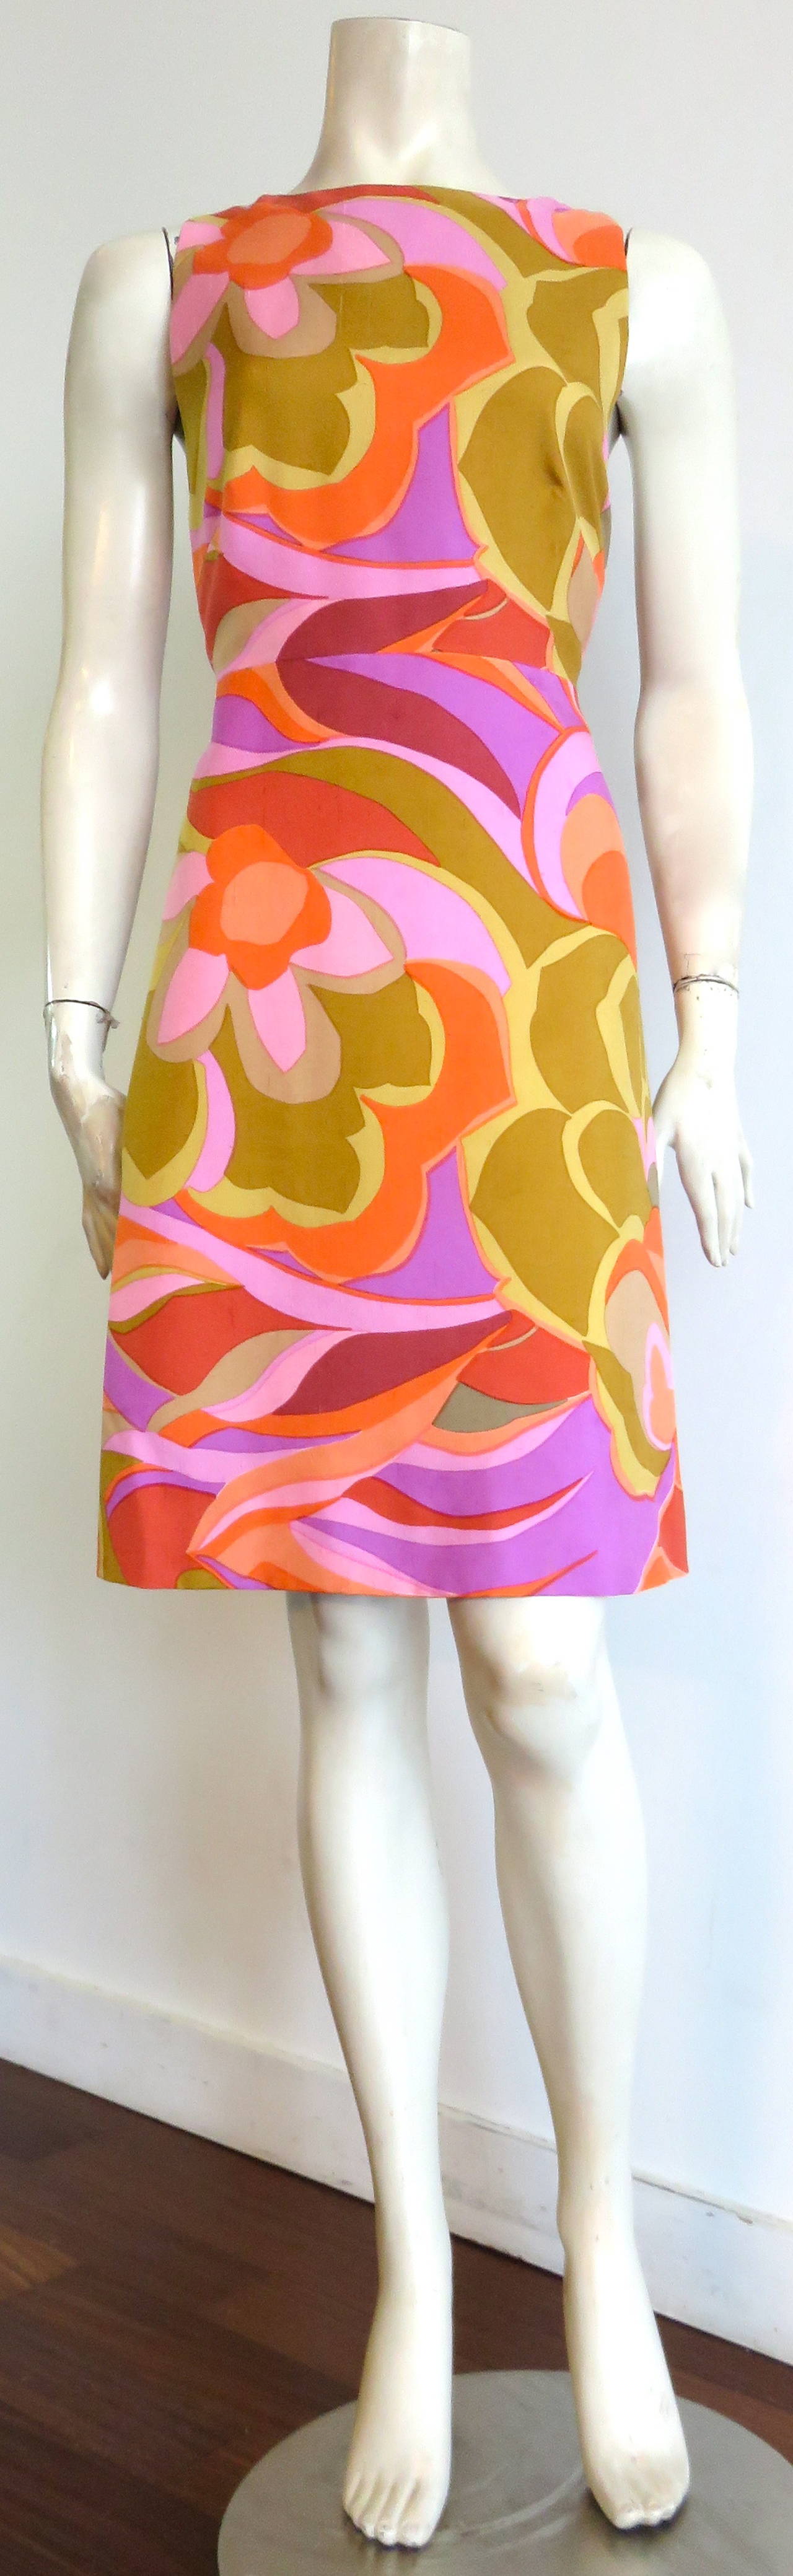 Mint condition, 1960's MADAME GRÉS Couture, floral printed, silk sun dress.

Designed during the late 1960's by Madame Grés (Alix Barton) in France.

The dress appears unworn with absolutely no signs of wear or damages.

Crisp, silk,